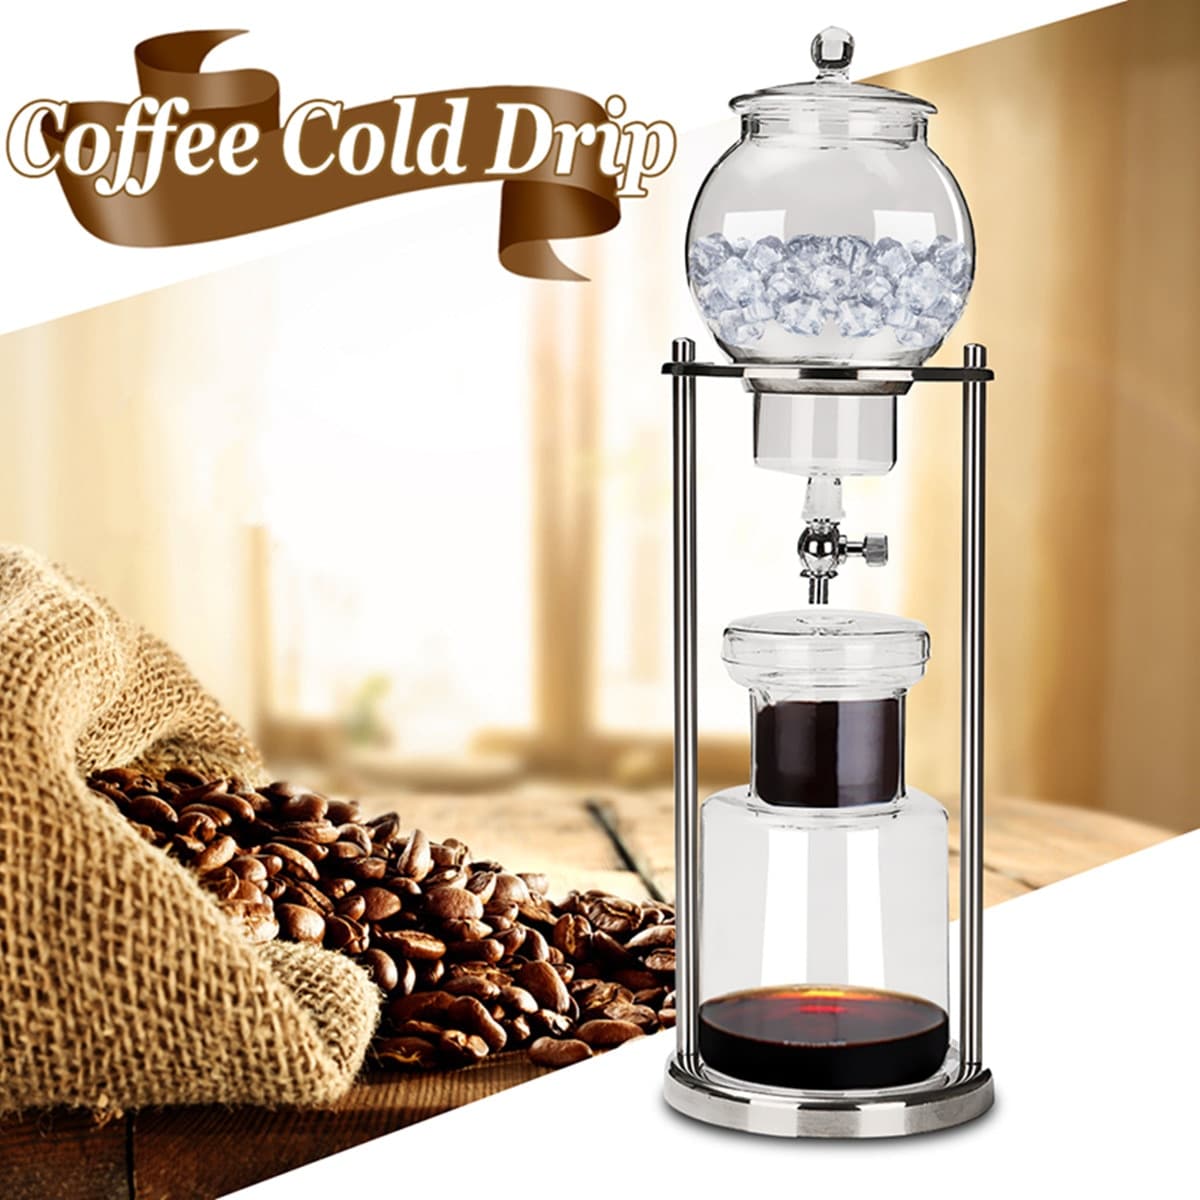 https://kindcooking.com/wp-content/uploads/2021/02/1000ML-Dutch-Coffee-Cold-Brew-Drip-Ice-Water-Hand-Coffee-Maker-Serve-For-10-Cups.jpg